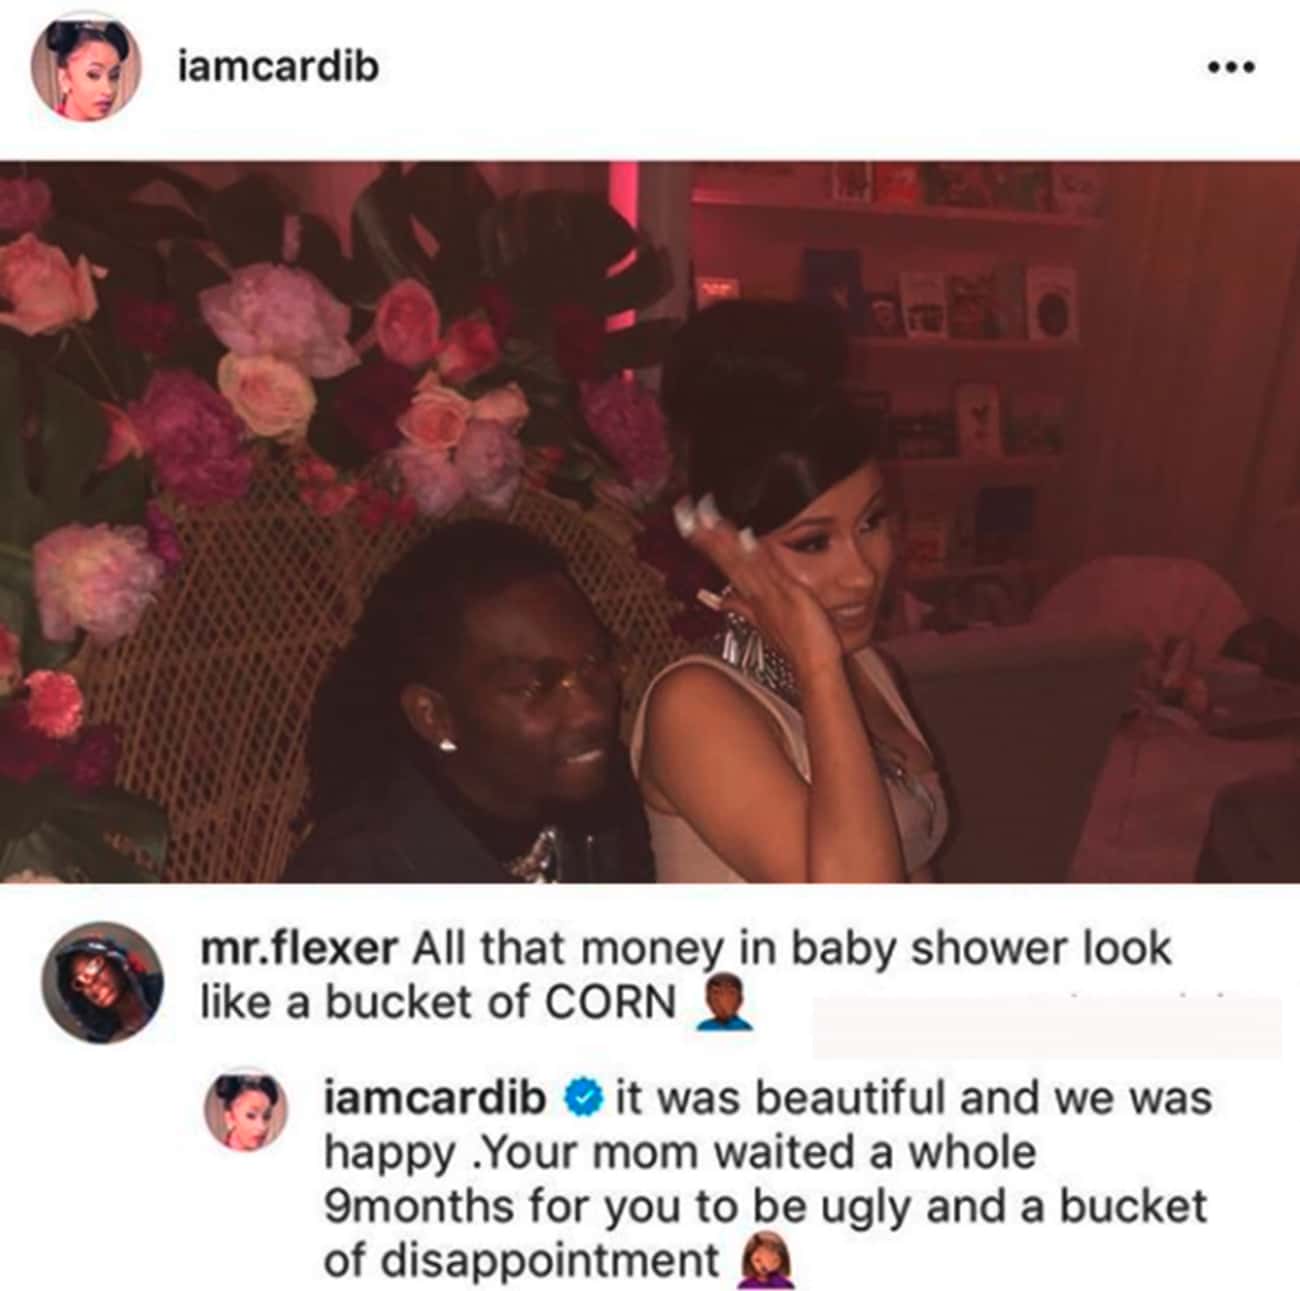 celebs savage replies - photo caption - iamcardib and mr.flexer All that money in baby shower look a bucket of Corn iamcardib it was beautiful and we was happy .Your mom waited a whole 9months for you to be ugly and a bucket of disappointment